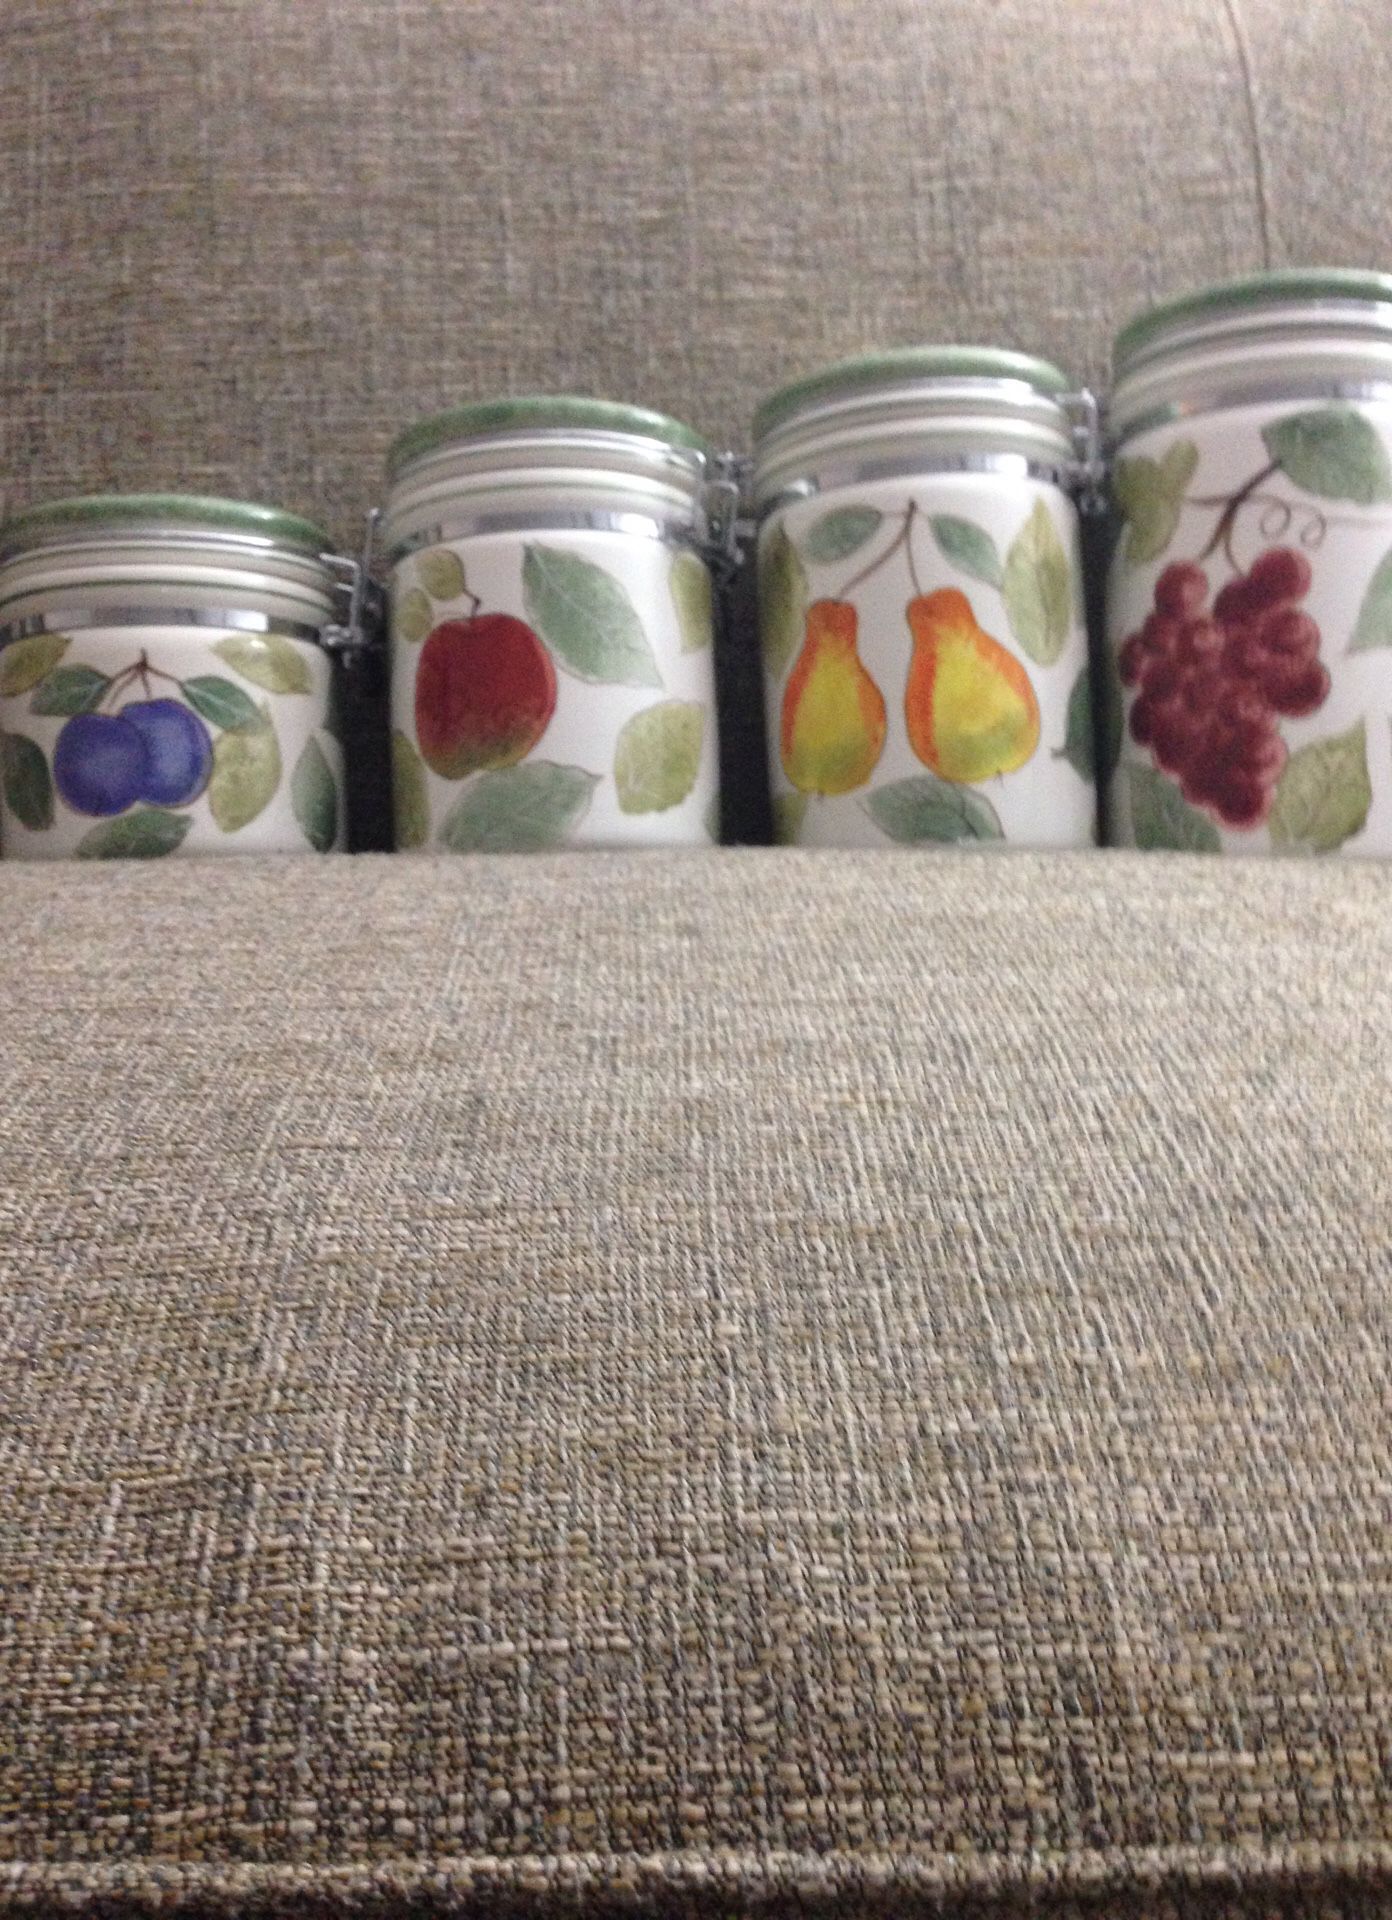 4 Piece Canister Set, Brand Name is Certified International. Please See All The Pictures and Read the w